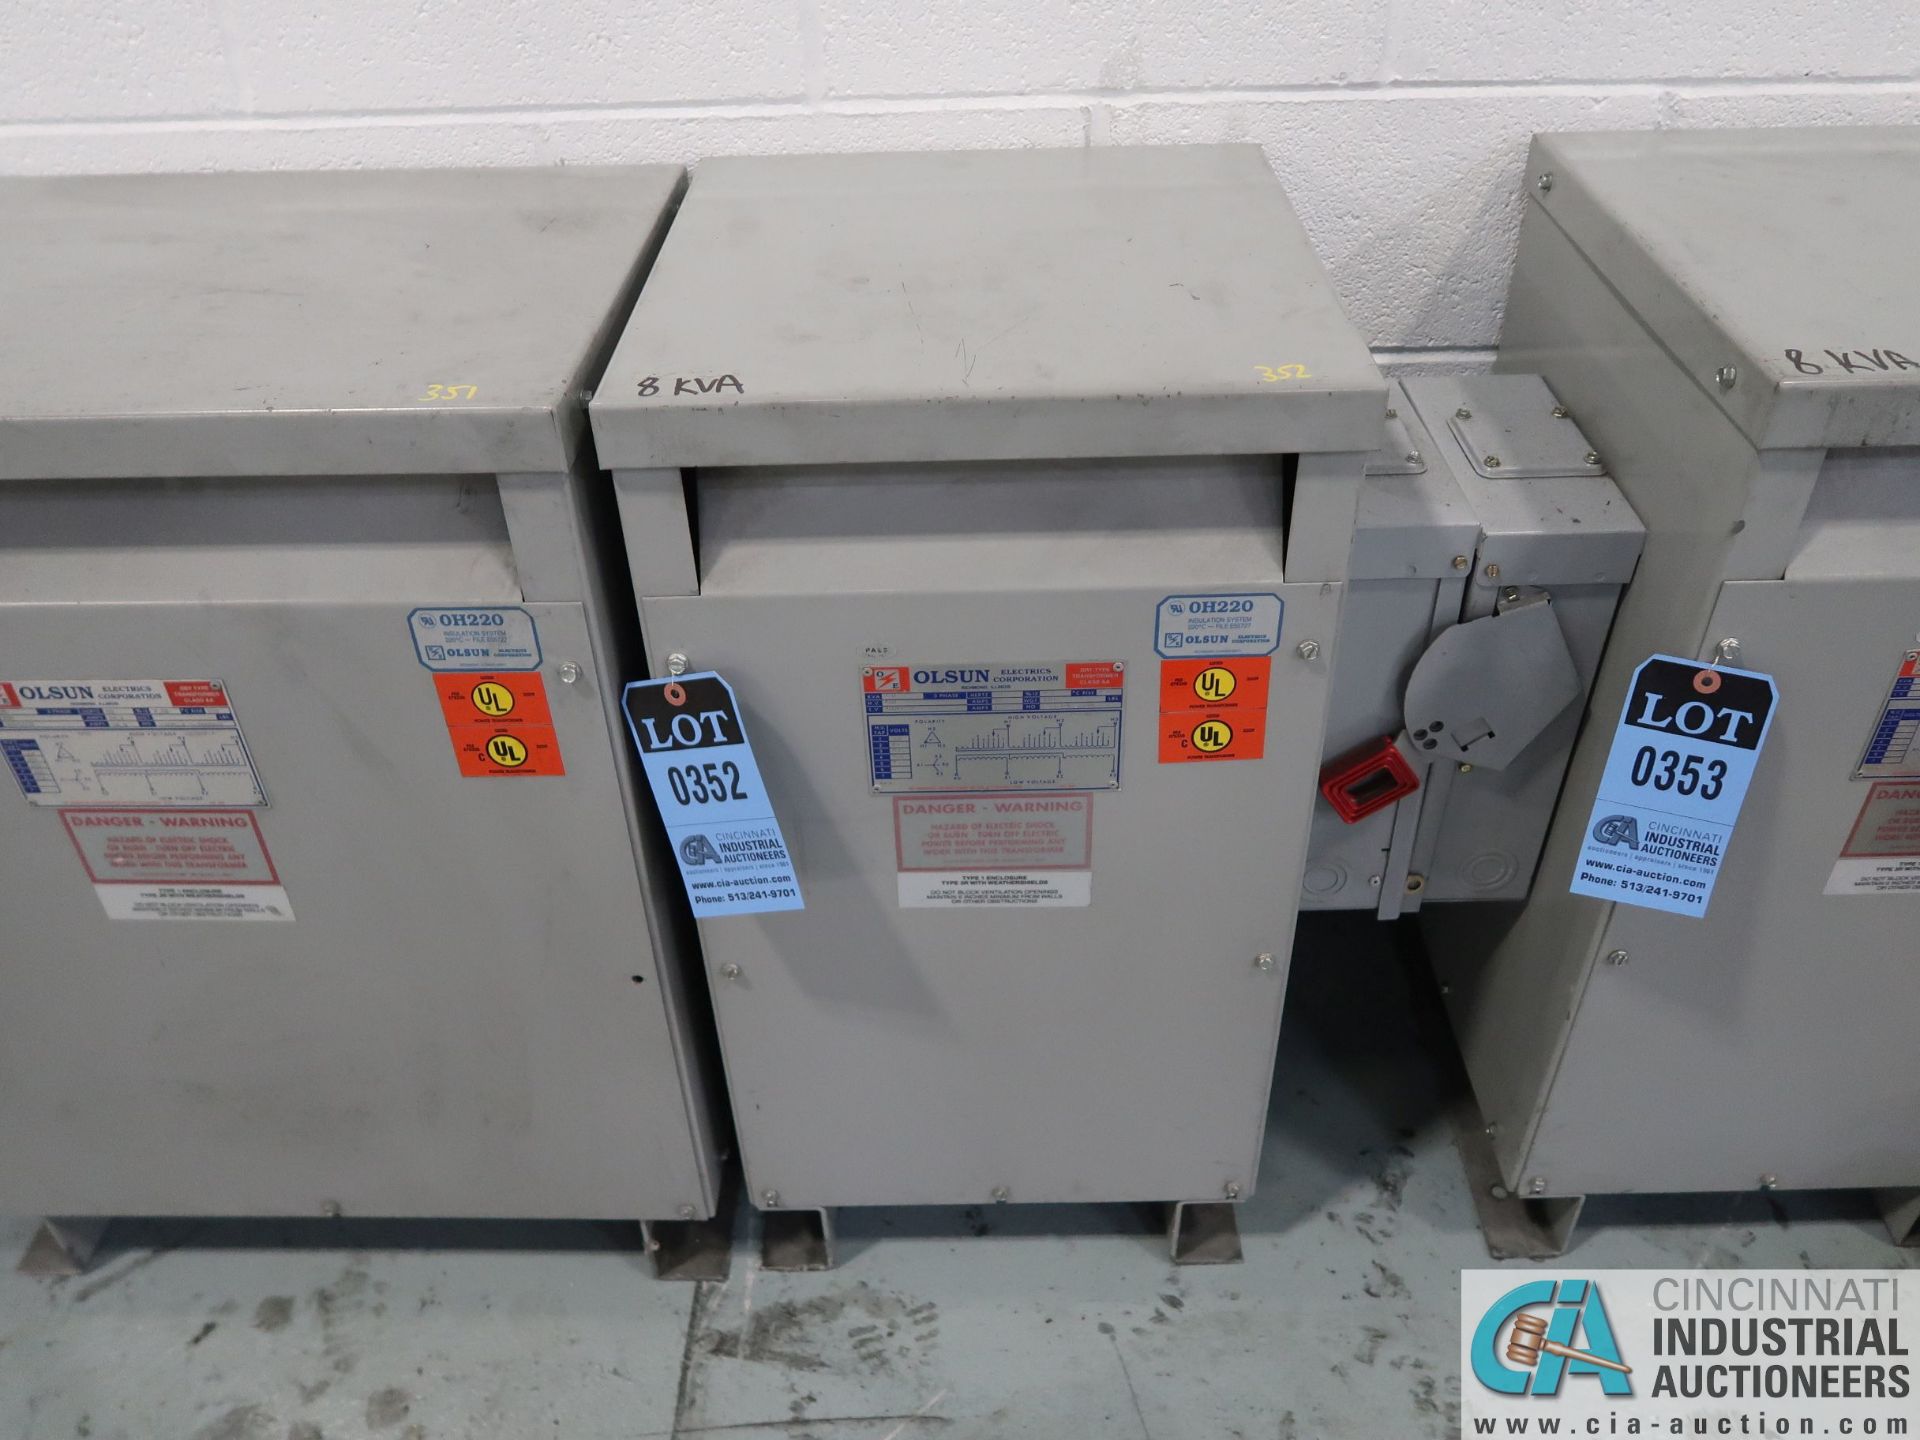 8.0 KVA OLSUN DRY TYPE TRANSFORMER *$25.00 RIGGING FEE DUE TO INDUSTRIAL SERVICES AND SALES*